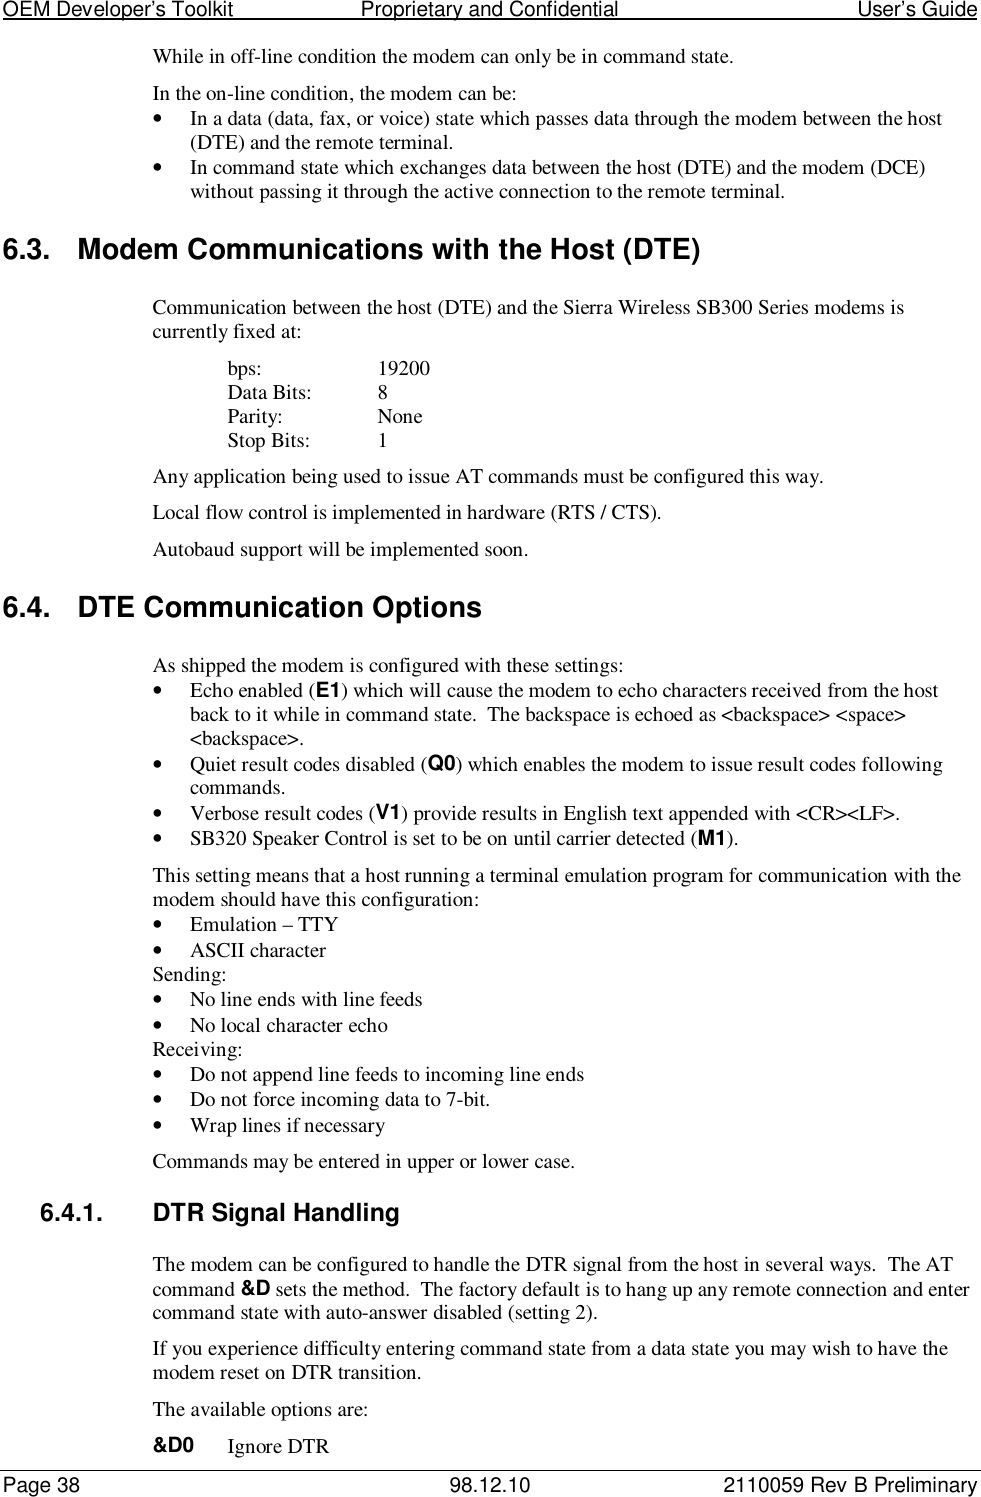 OEM Developer’s Toolkit                        Proprietary and Confidential                                        User’s GuidePage 38 98.12.10 2110059 Rev B PreliminaryWhile in off-line condition the modem can only be in command state.In the on-line condition, the modem can be:• In a data (data, fax, or voice) state which passes data through the modem between the host(DTE) and the remote terminal.• In command state which exchanges data between the host (DTE) and the modem (DCE)without passing it through the active connection to the remote terminal.6.3.  Modem Communications with the Host (DTE)Communication between the host (DTE) and the Sierra Wireless SB300 Series modems iscurrently fixed at:bps: 19200Data Bits: 8Parity: NoneStop Bits: 1Any application being used to issue AT commands must be configured this way.Local flow control is implemented in hardware (RTS / CTS).Autobaud support will be implemented soon.6.4.  DTE Communication OptionsAs shipped the modem is configured with these settings:• Echo enabled (E1) which will cause the modem to echo characters received from the hostback to it while in command state.  The backspace is echoed as &lt;backspace&gt; &lt;space&gt;&lt;backspace&gt;.• Quiet result codes disabled (Q0) which enables the modem to issue result codes followingcommands.• Verbose result codes (V1) provide results in English text appended with &lt;CR&gt;&lt;LF&gt;.• SB320 Speaker Control is set to be on until carrier detected (M1).This setting means that a host running a terminal emulation program for communication with themodem should have this configuration:• Emulation – TTY• ASCII characterSending:• No line ends with line feeds• No local character echoReceiving:• Do not append line feeds to incoming line ends• Do not force incoming data to 7-bit.• Wrap lines if necessaryCommands may be entered in upper or lower case.6.4.1.  DTR Signal HandlingThe modem can be configured to handle the DTR signal from the host in several ways.  The ATcommand &amp;D sets the method.  The factory default is to hang up any remote connection and entercommand state with auto-answer disabled (setting 2).If you experience difficulty entering command state from a data state you may wish to have themodem reset on DTR transition.The available options are:&amp;D0 Ignore DTR